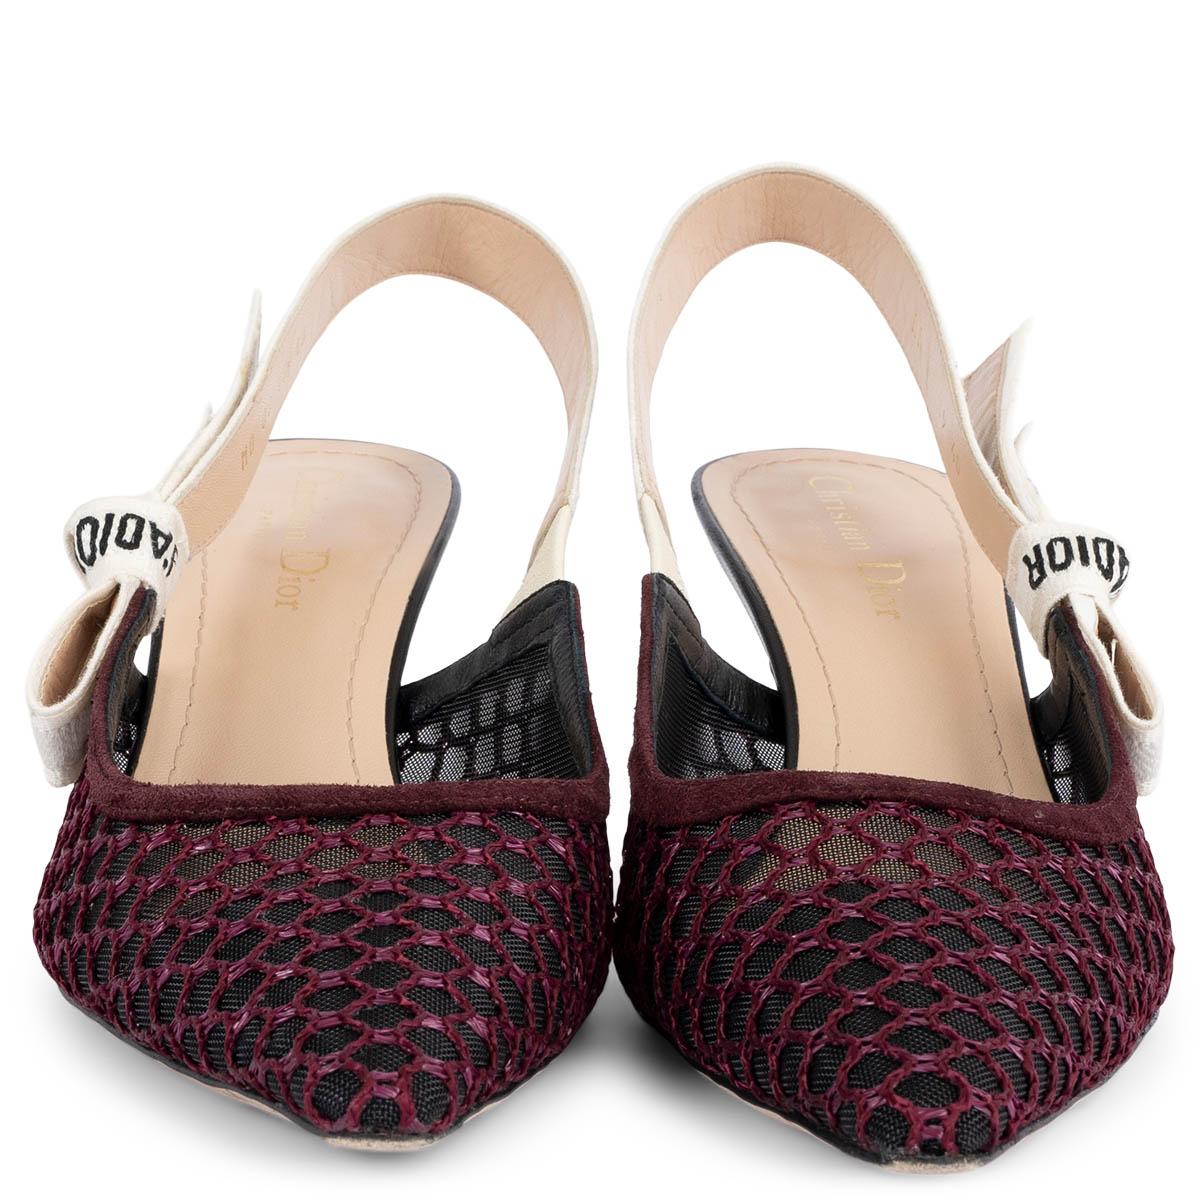 100% authentic Christian Dior J'Adior slingback pumps crafted in black and burgundy mesh and suede. The off-white two-tone embroidered 'J'ADIOR' ribbon is embellished with a flat bow. Have been worn and are in excellent condition.